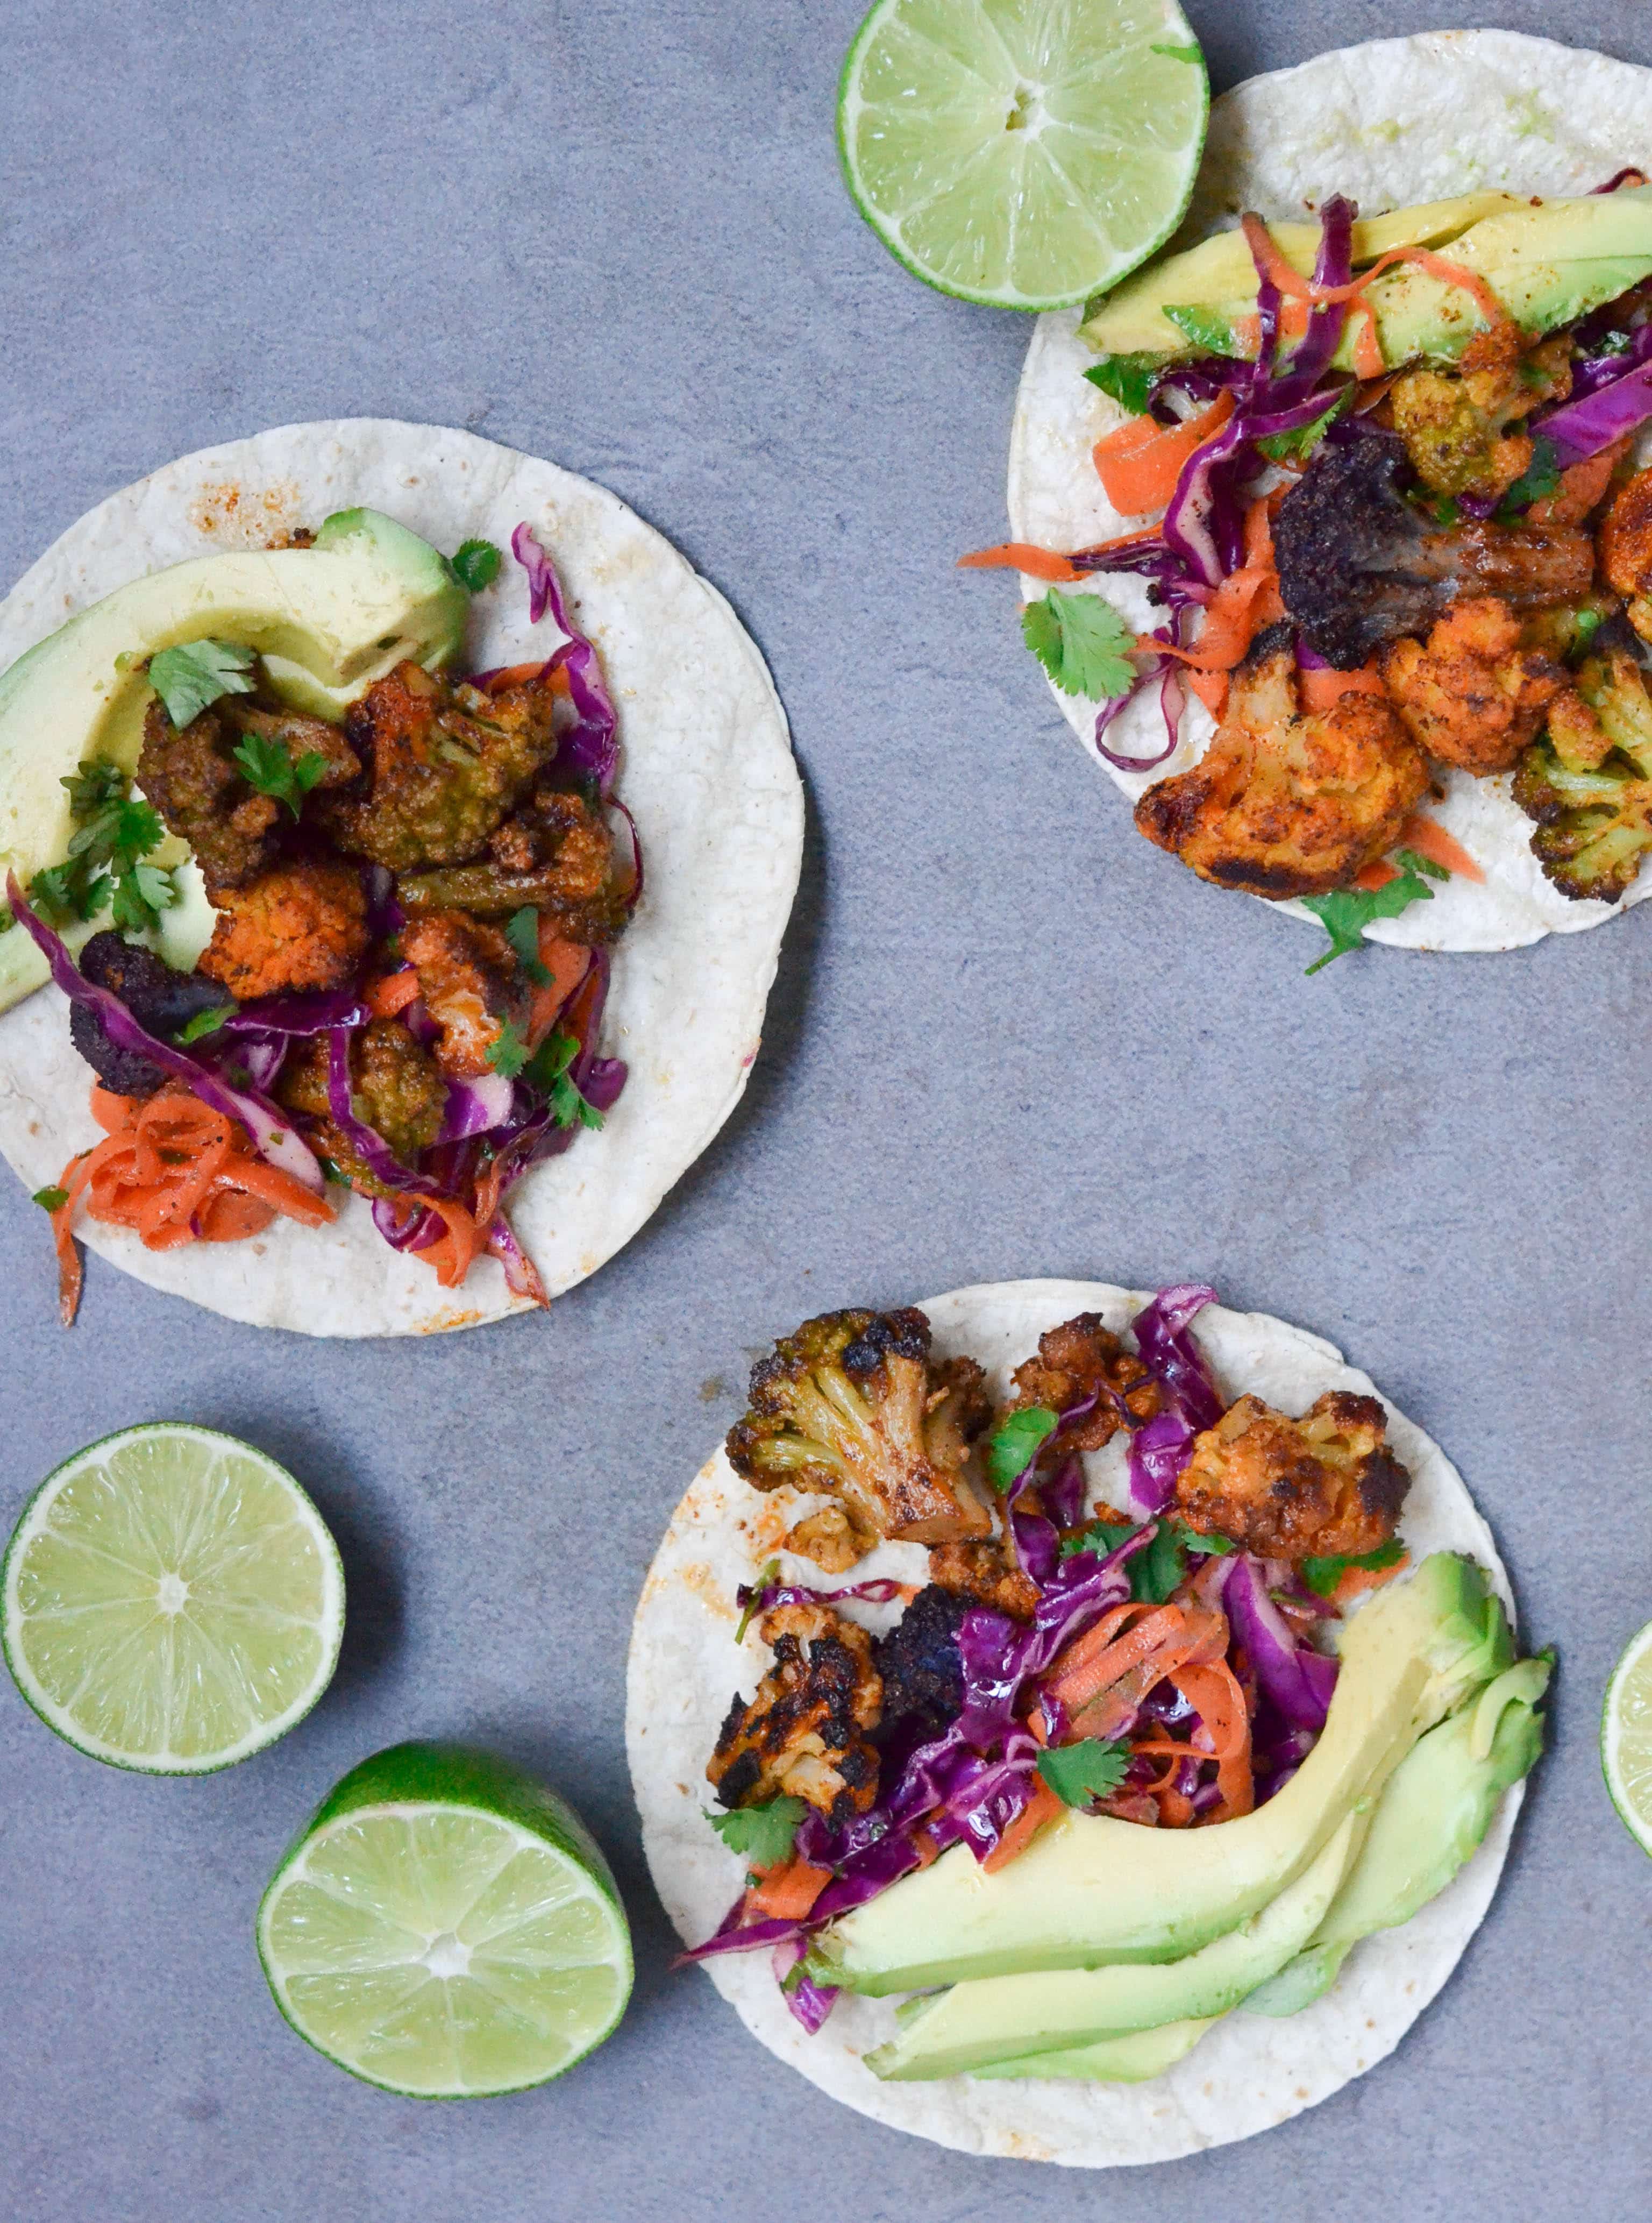 Roasted Cauliflower Tacos (GF, DF, V) - You'll love these vegetarian tacos from A Dash of Megnut. They're so flavorful, you won't even miss the meat! They're ready in under 30 minutes, making them a great weeknight meal. And better yet, they're gluten-free and vegan too!